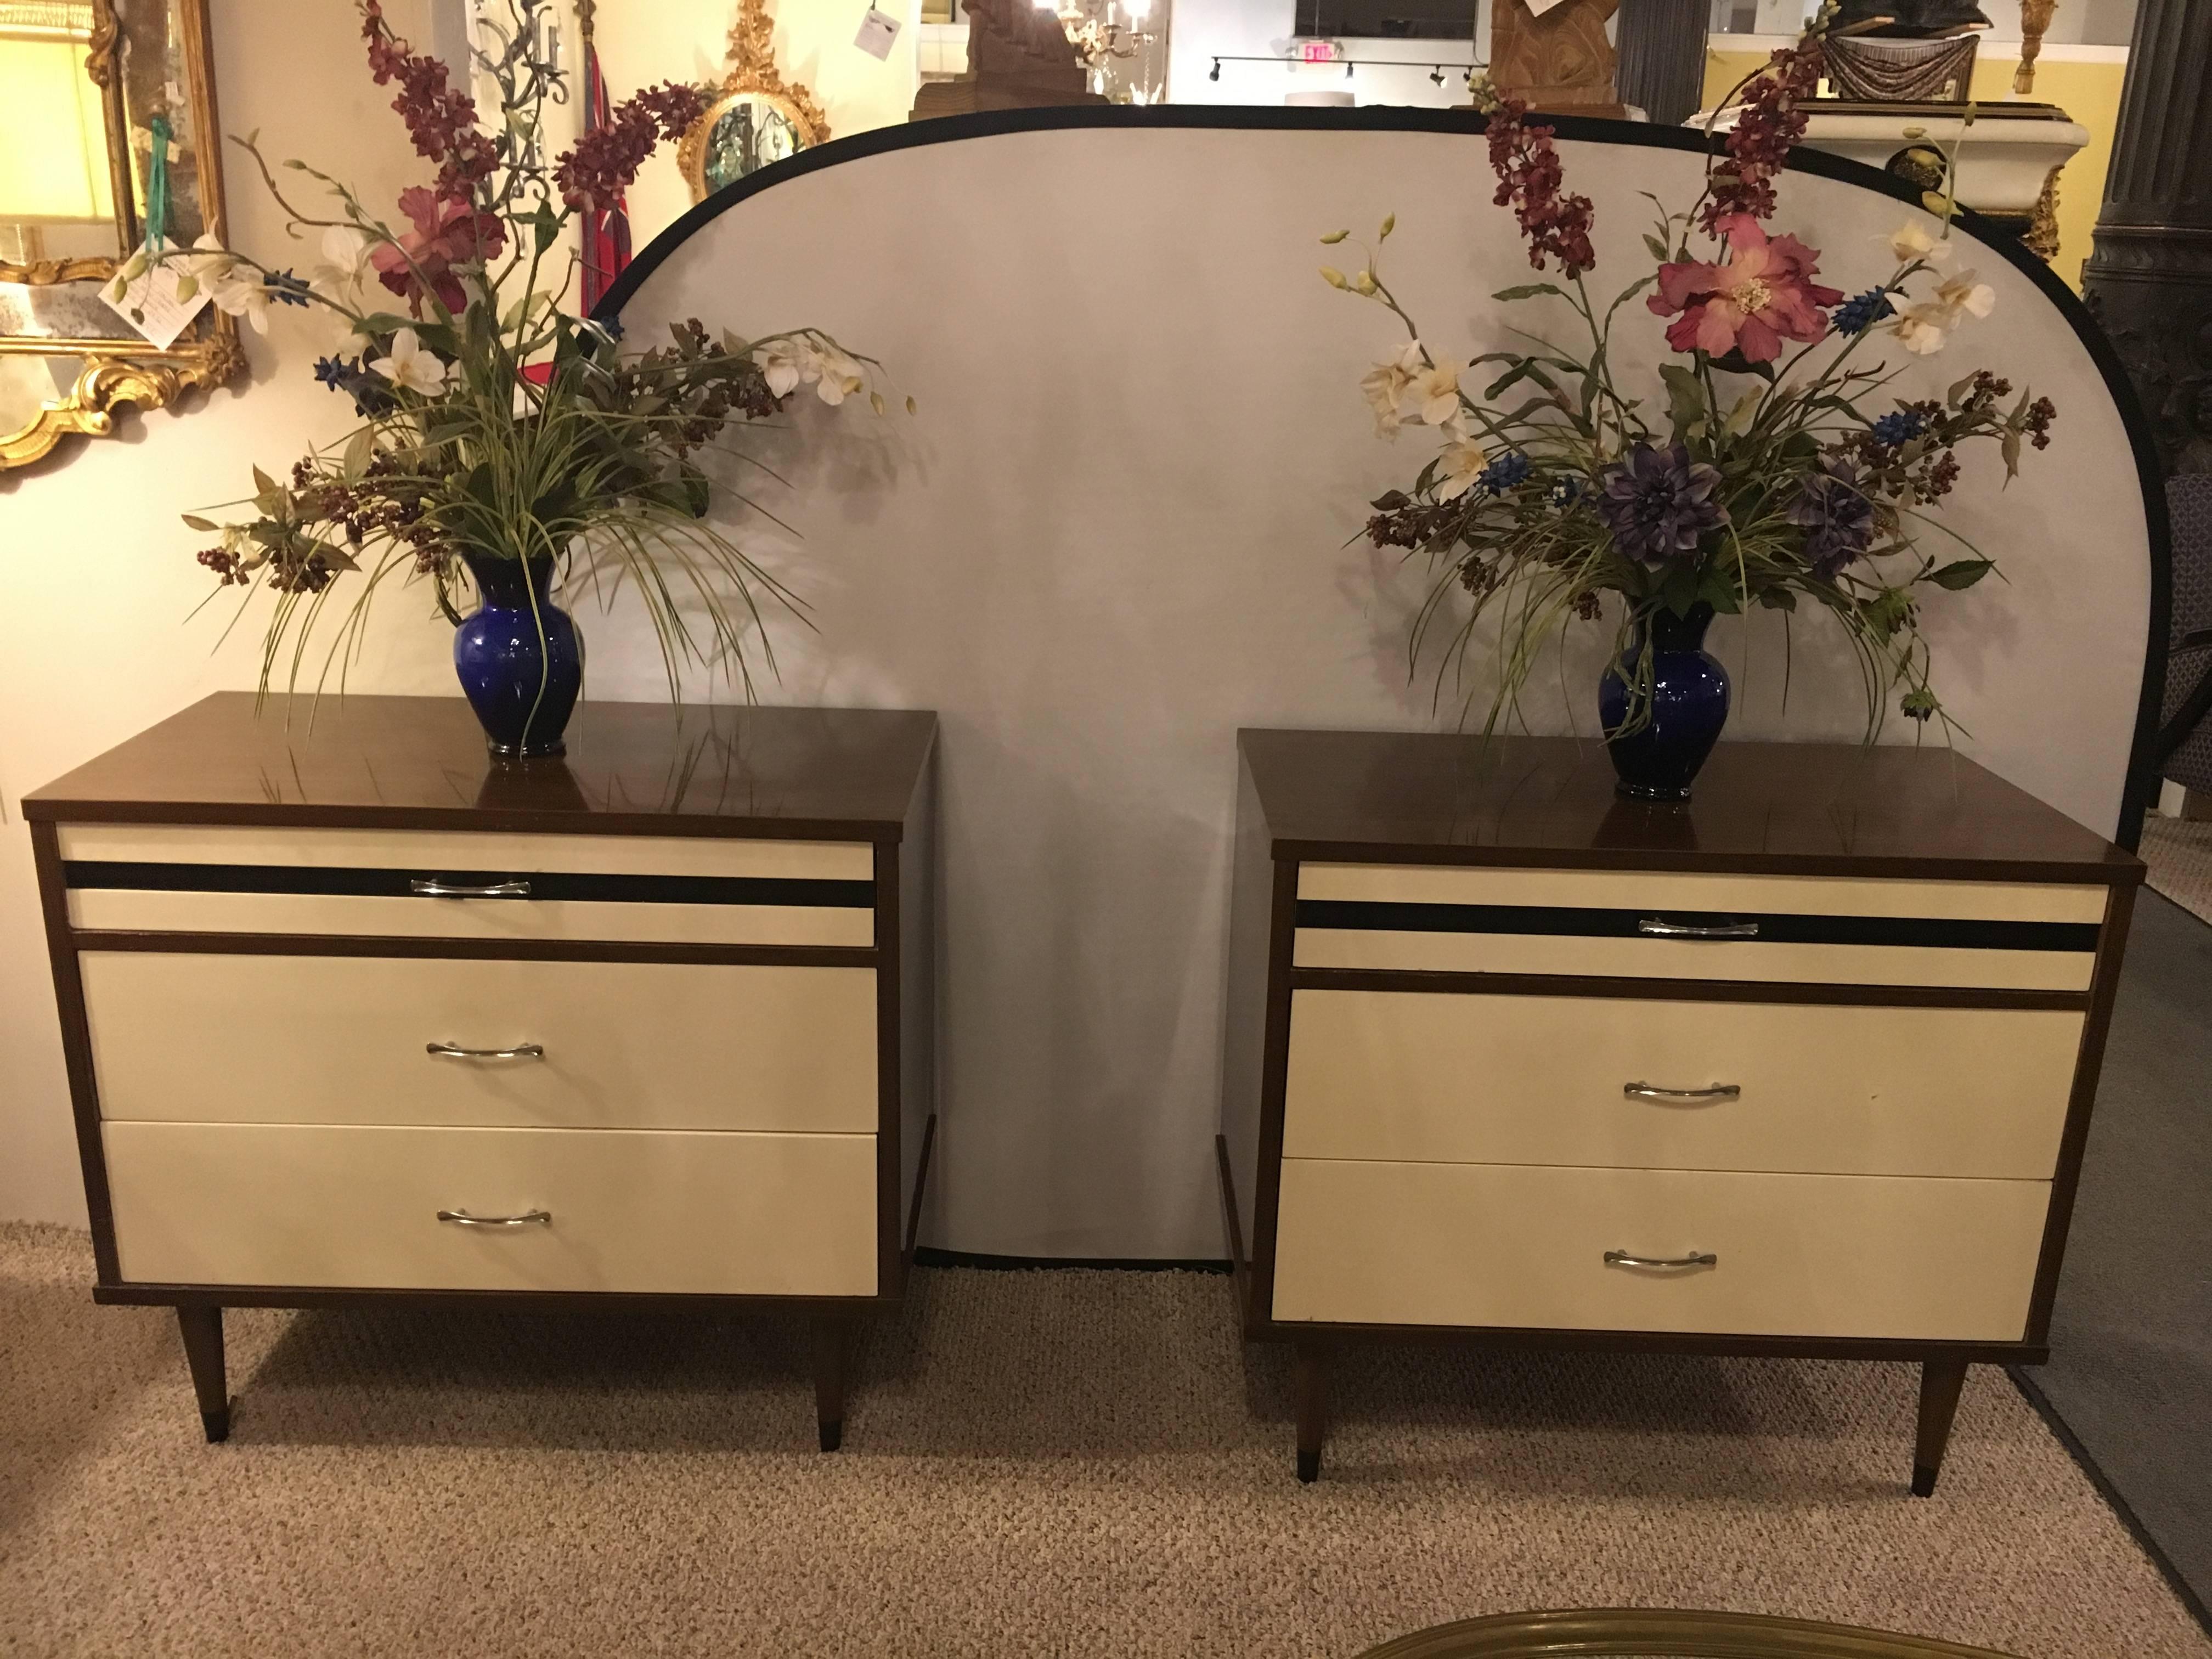 Stylemaker signed pair of Mid-Century Modern bachelor chests or nightstands. Recently polished and waxed. The white and wood fronts sitting on tapering legs. The recently polished piece would make a fine addition to any Mid-Century setting in the